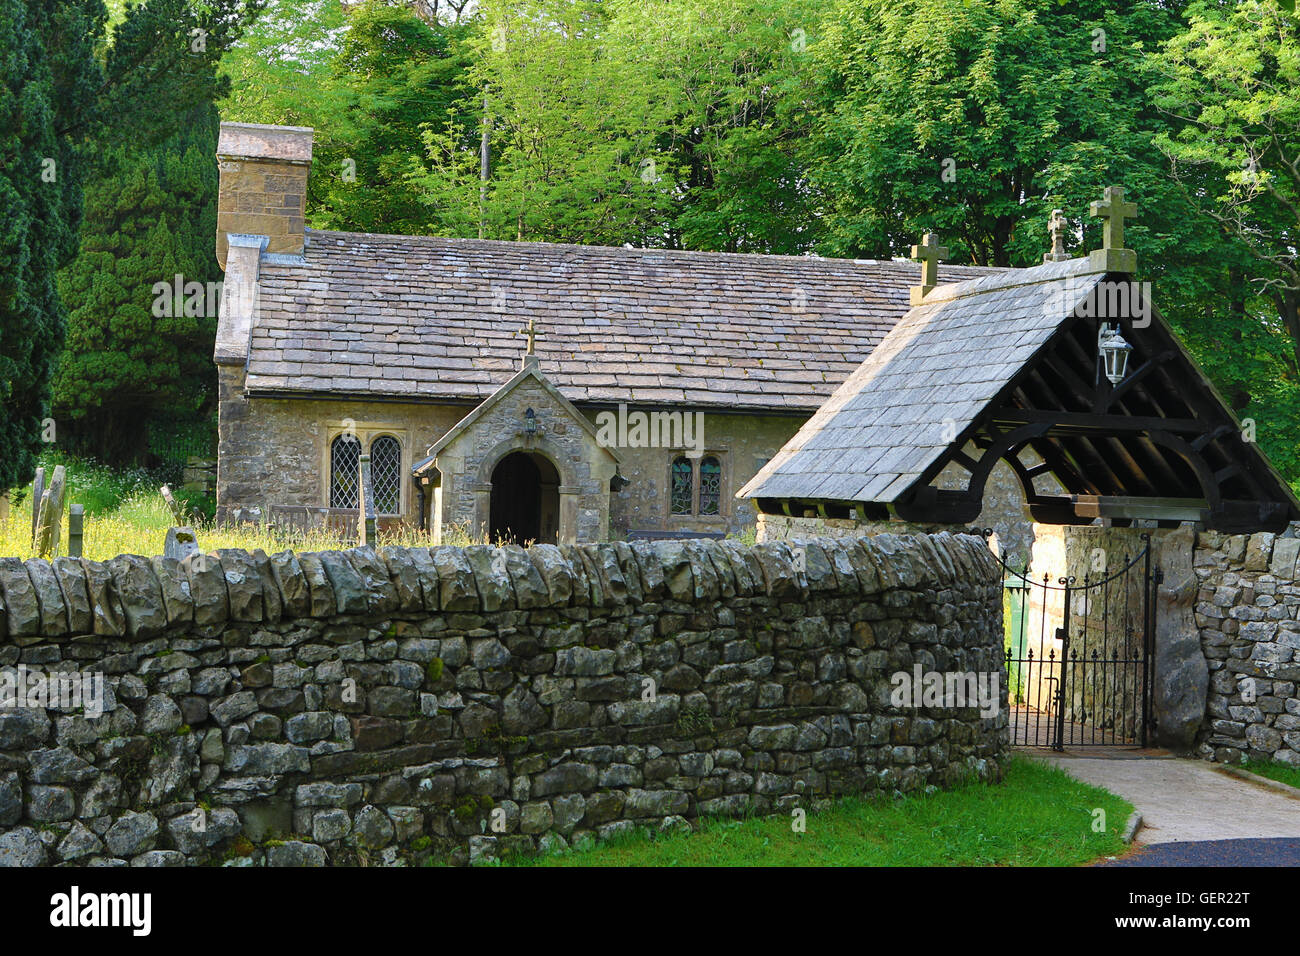 The old church of St. Leonard's in Chapel-le-Dale, North Yorkshire, England. Stock Photo